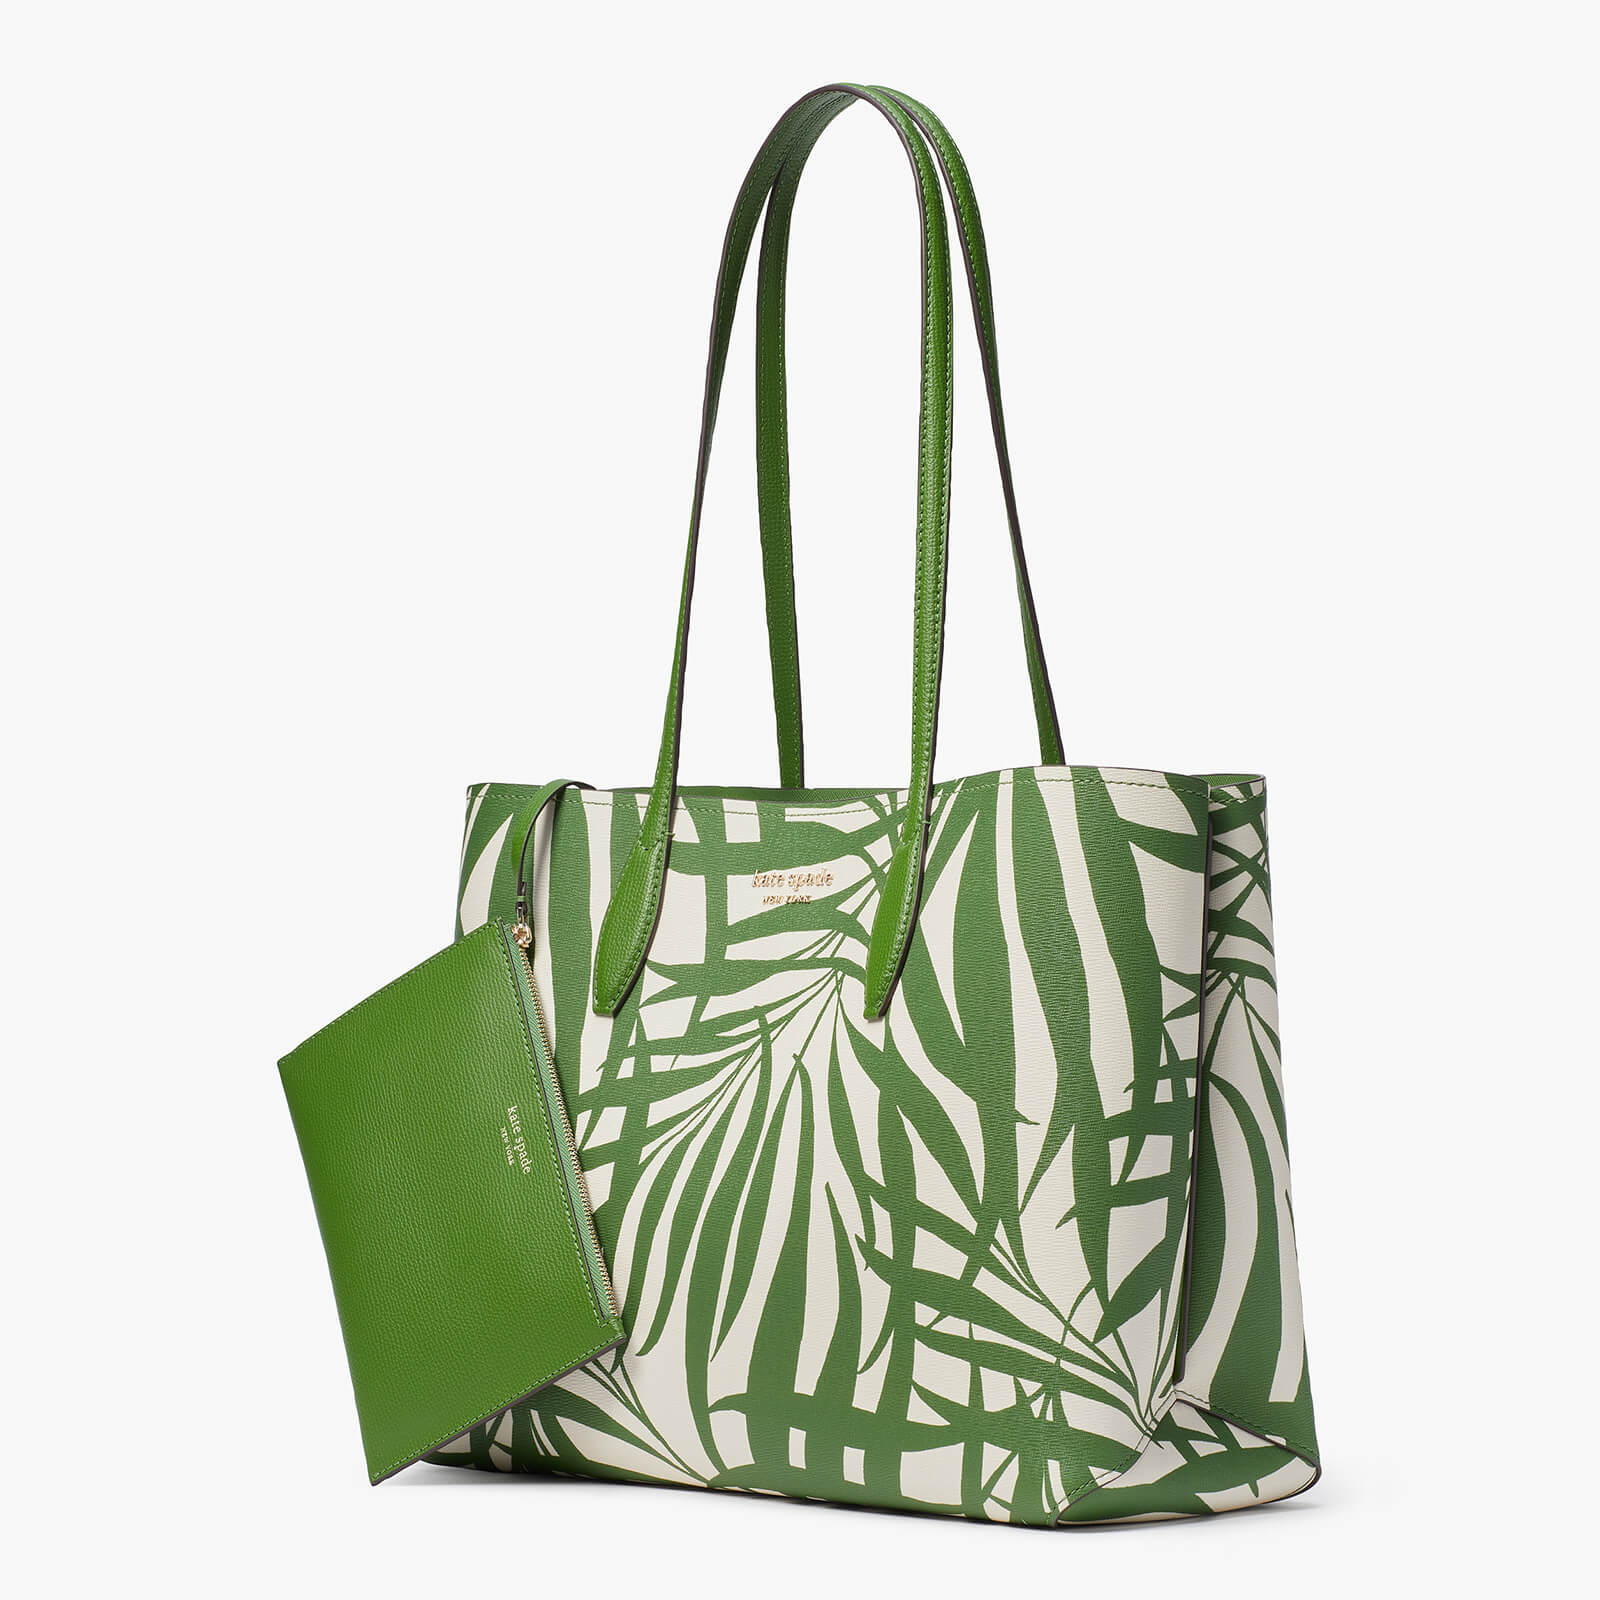 kate spade new york women's all day palm fronds printed large tote bag - bitter greens multi